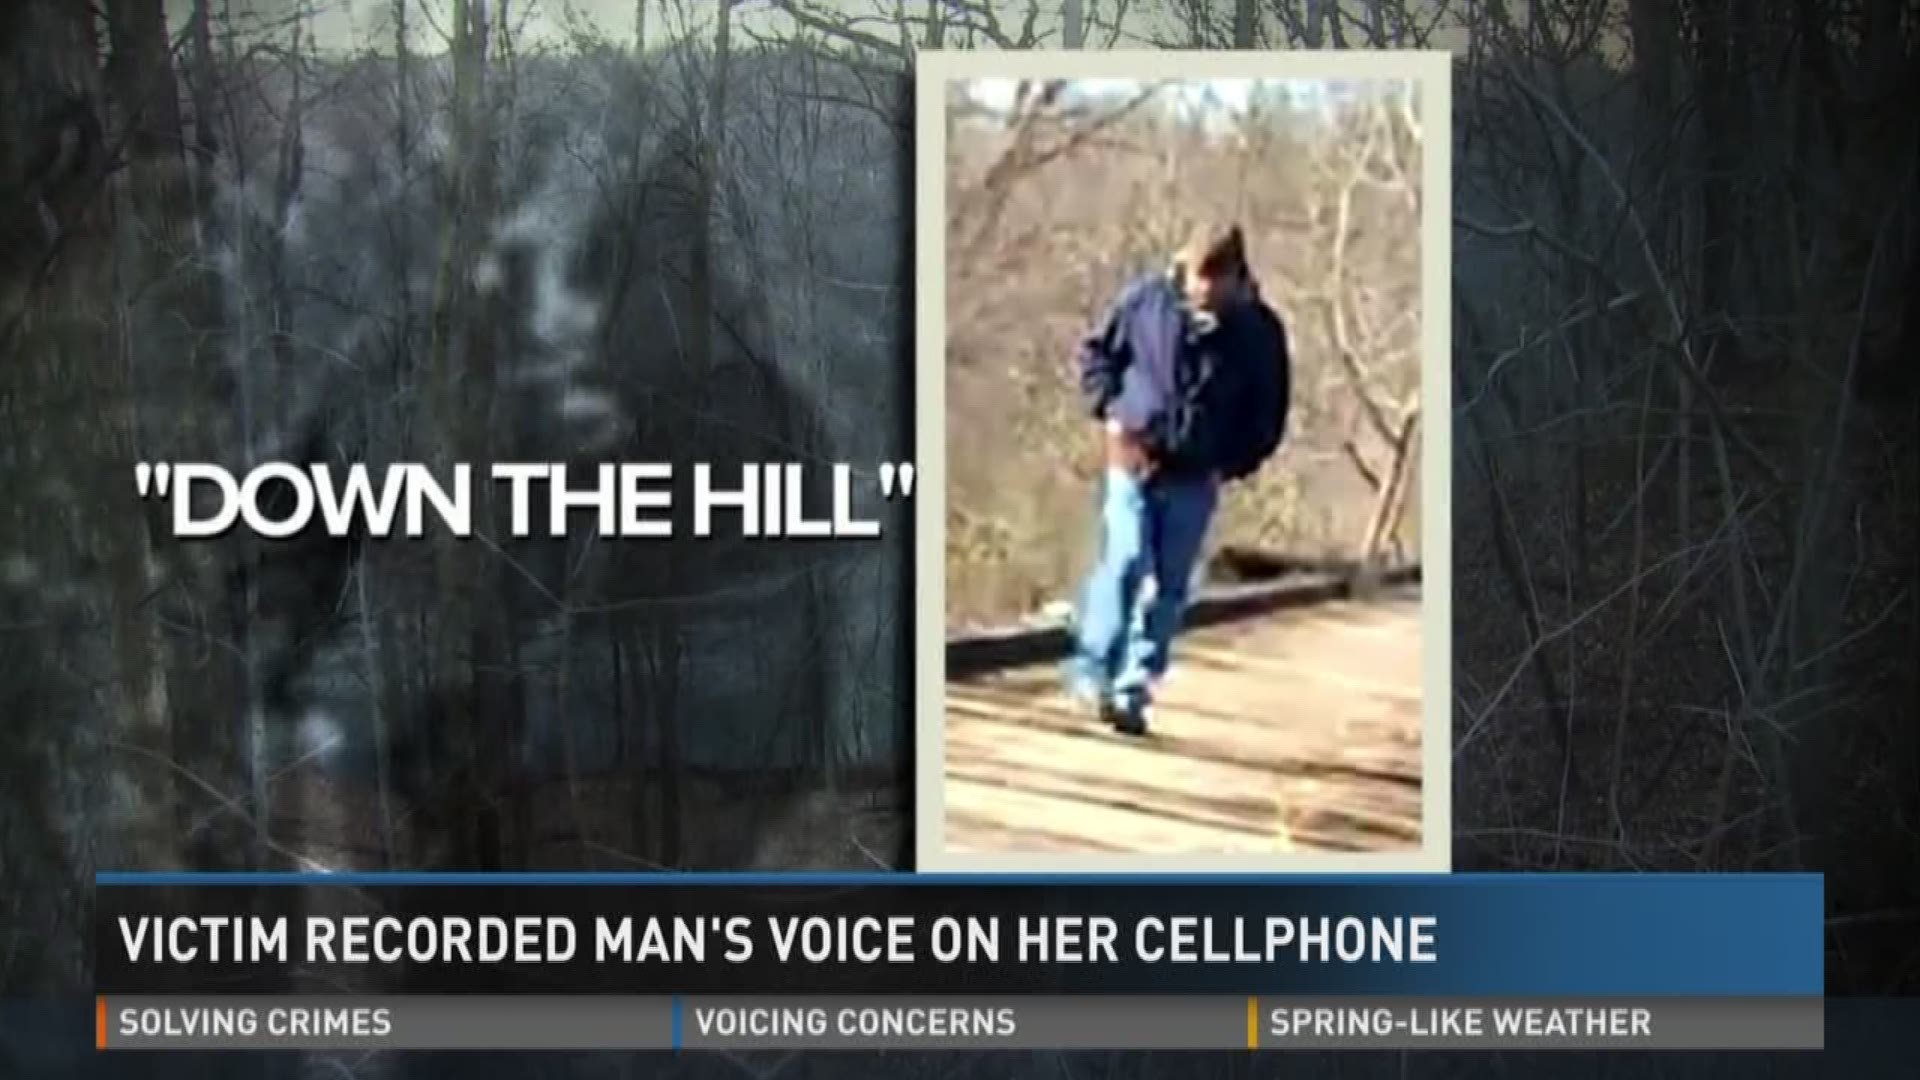 Victim recorded man's voice on her cell phone